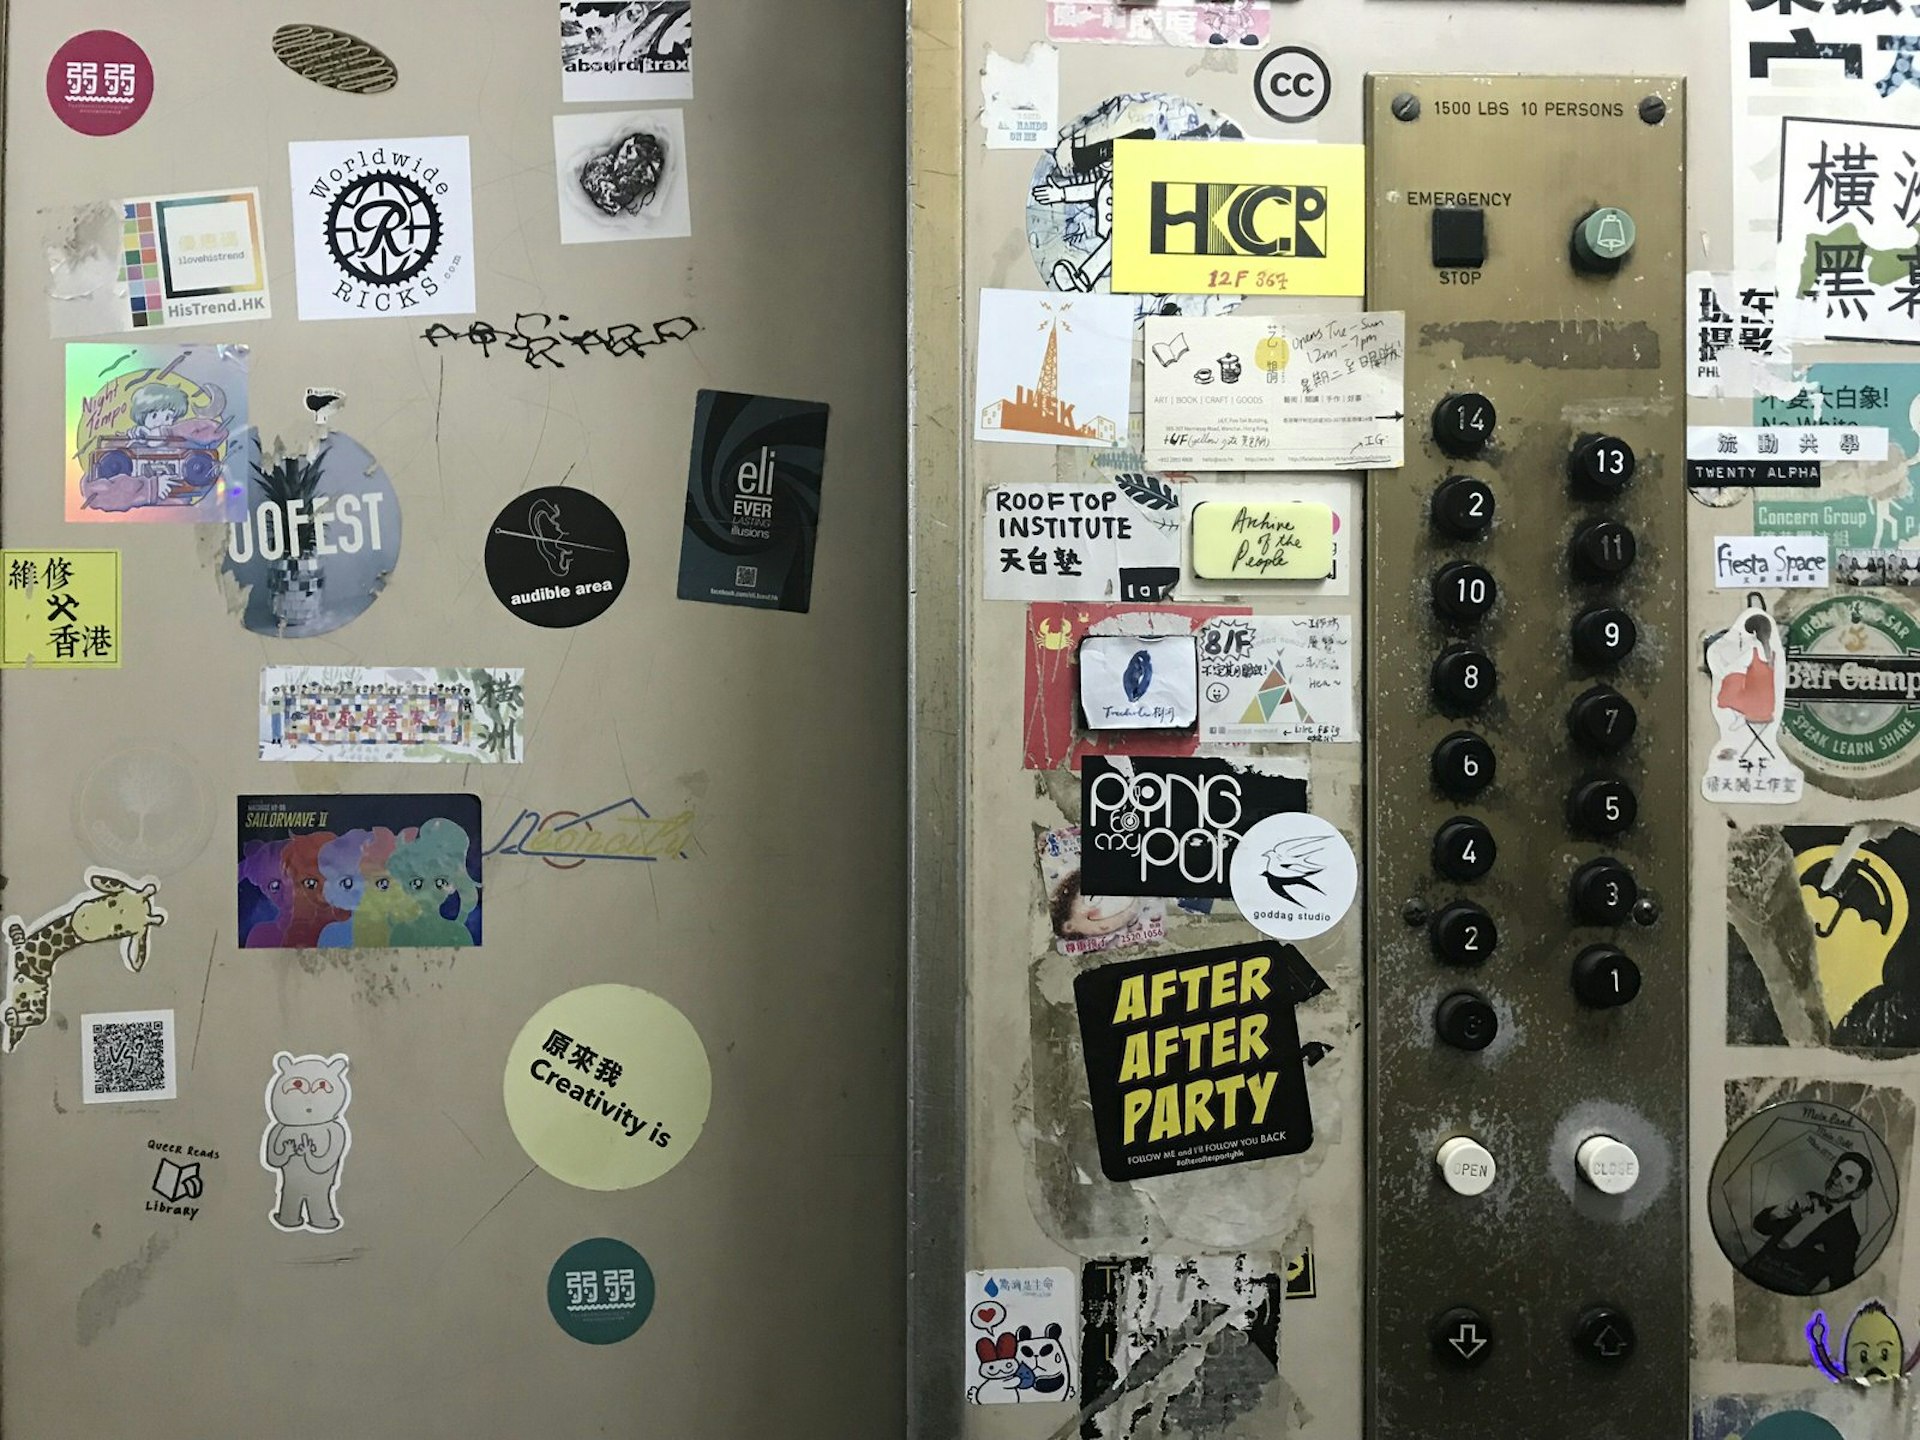 Old elevator doors and black buttons covered in stickers